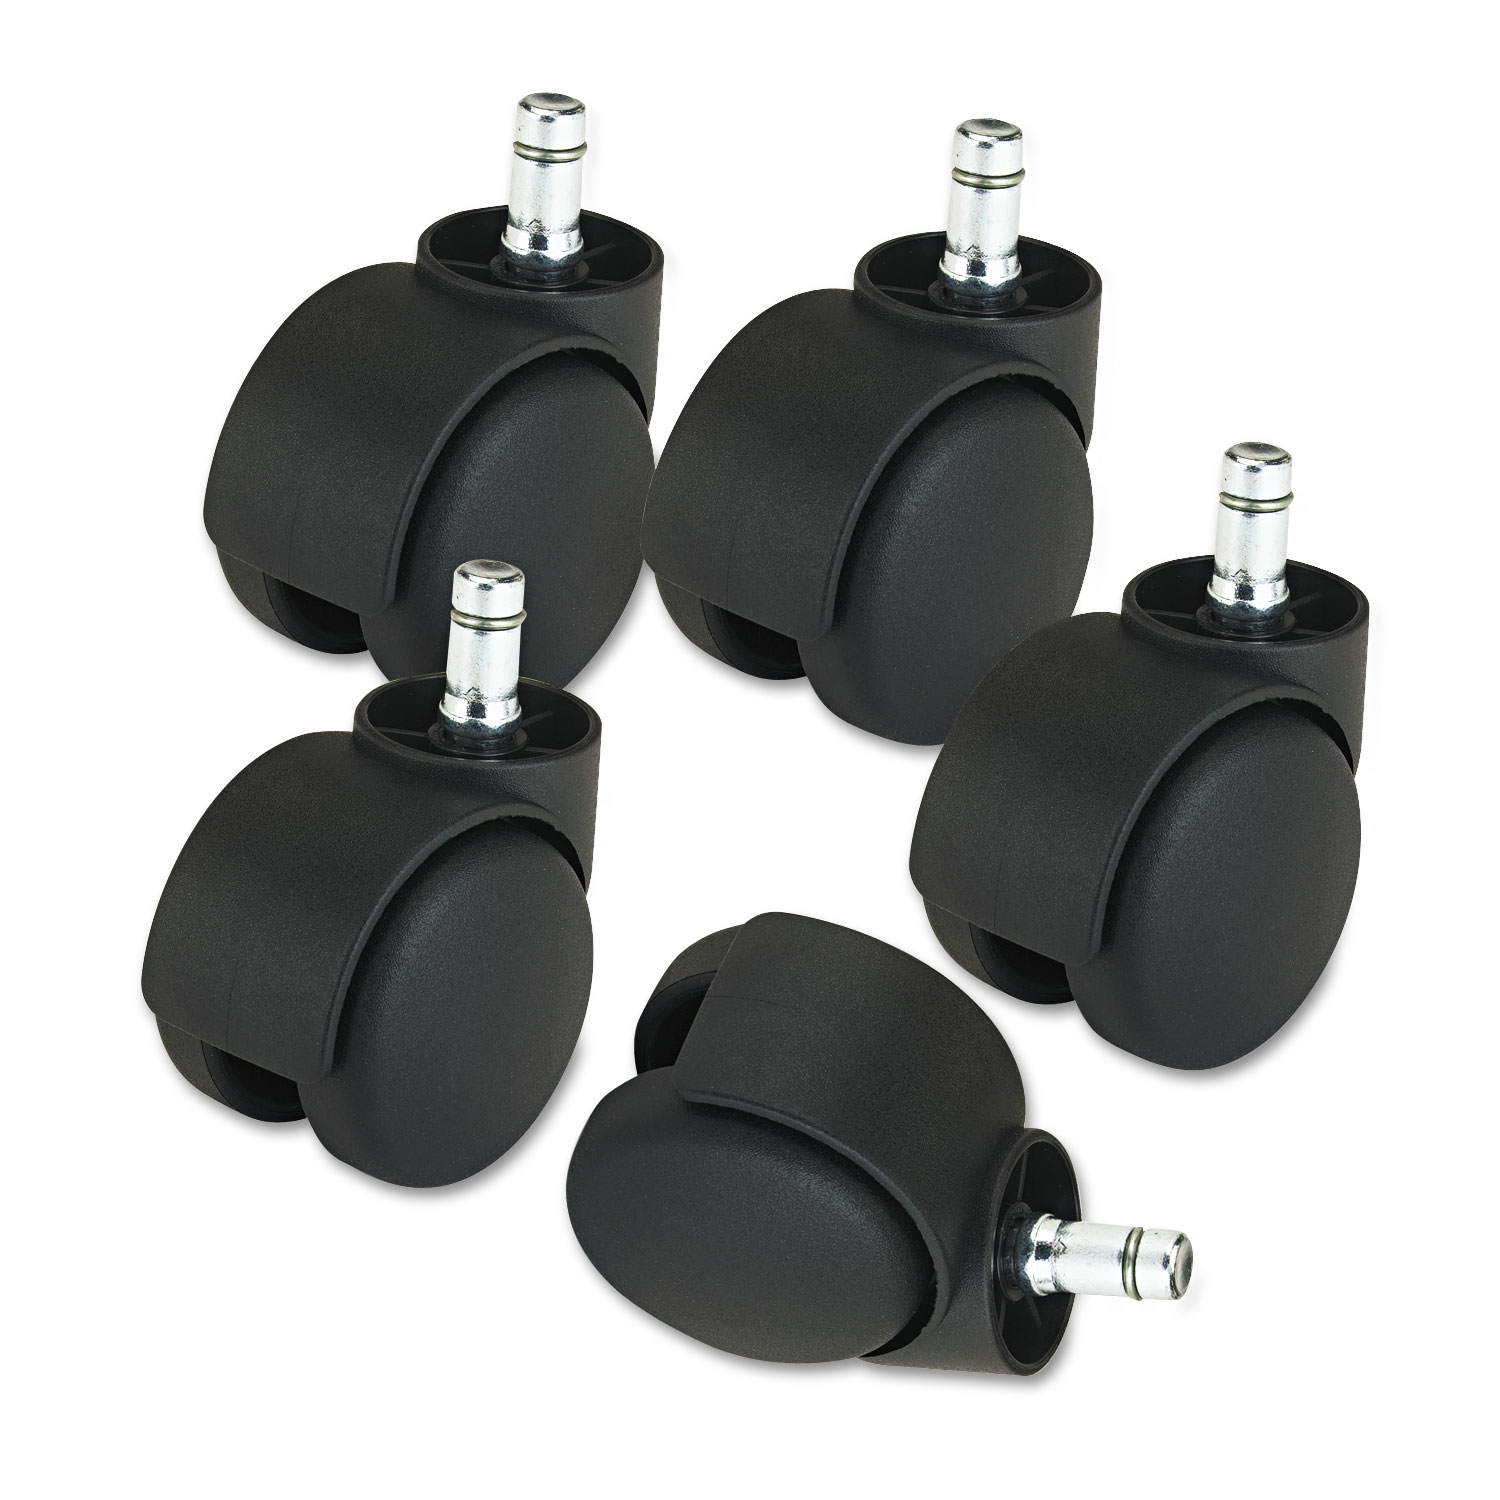 Deluxe Futura Casters by Master Caster MAS TimeSupplies